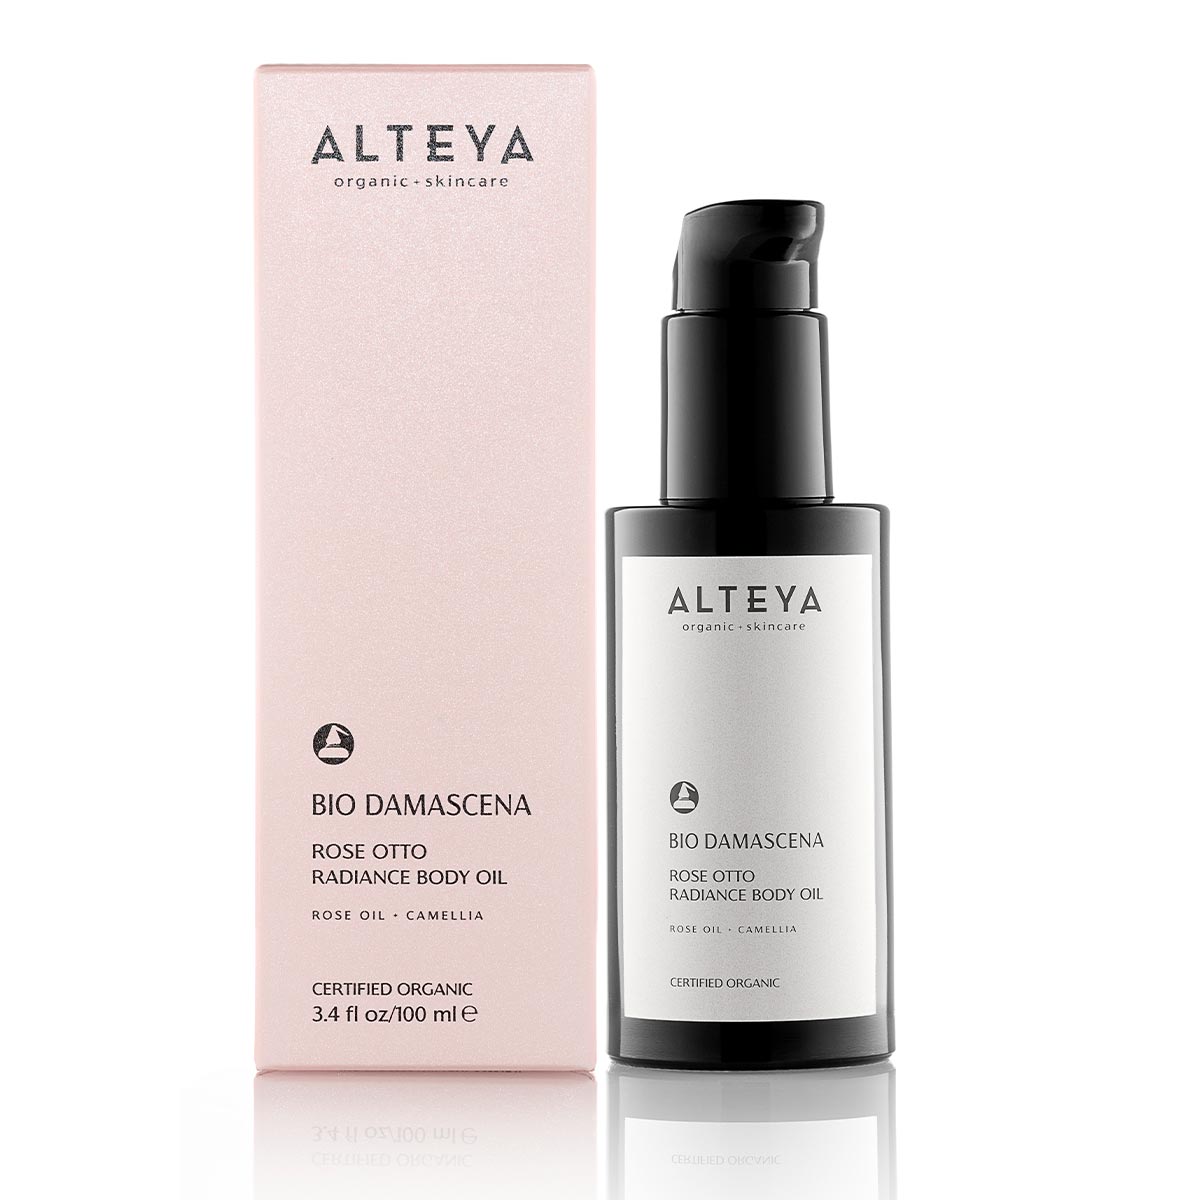 Alteya Organics offers the Bio Damascena Rose Otto Radiance Body Oil, a rejuvenating product enriched with essential nutrients for healthy skin. This 50ml oil is packed with antioxidants that combat free radicals.